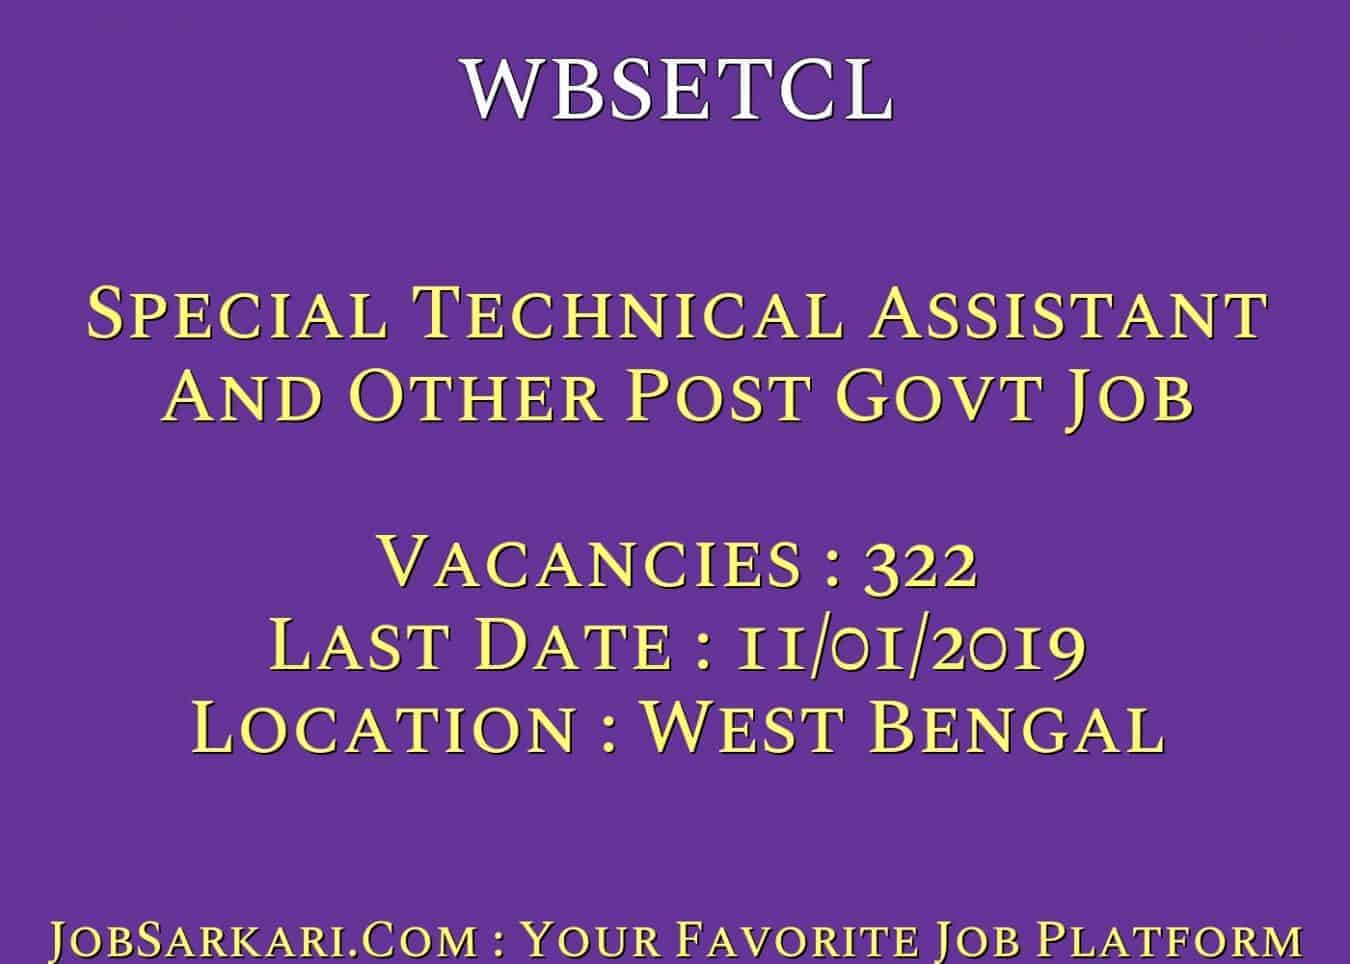 WBSETCL Recruitment 2018 For Special Technical Assistant And Other Post Govt Job